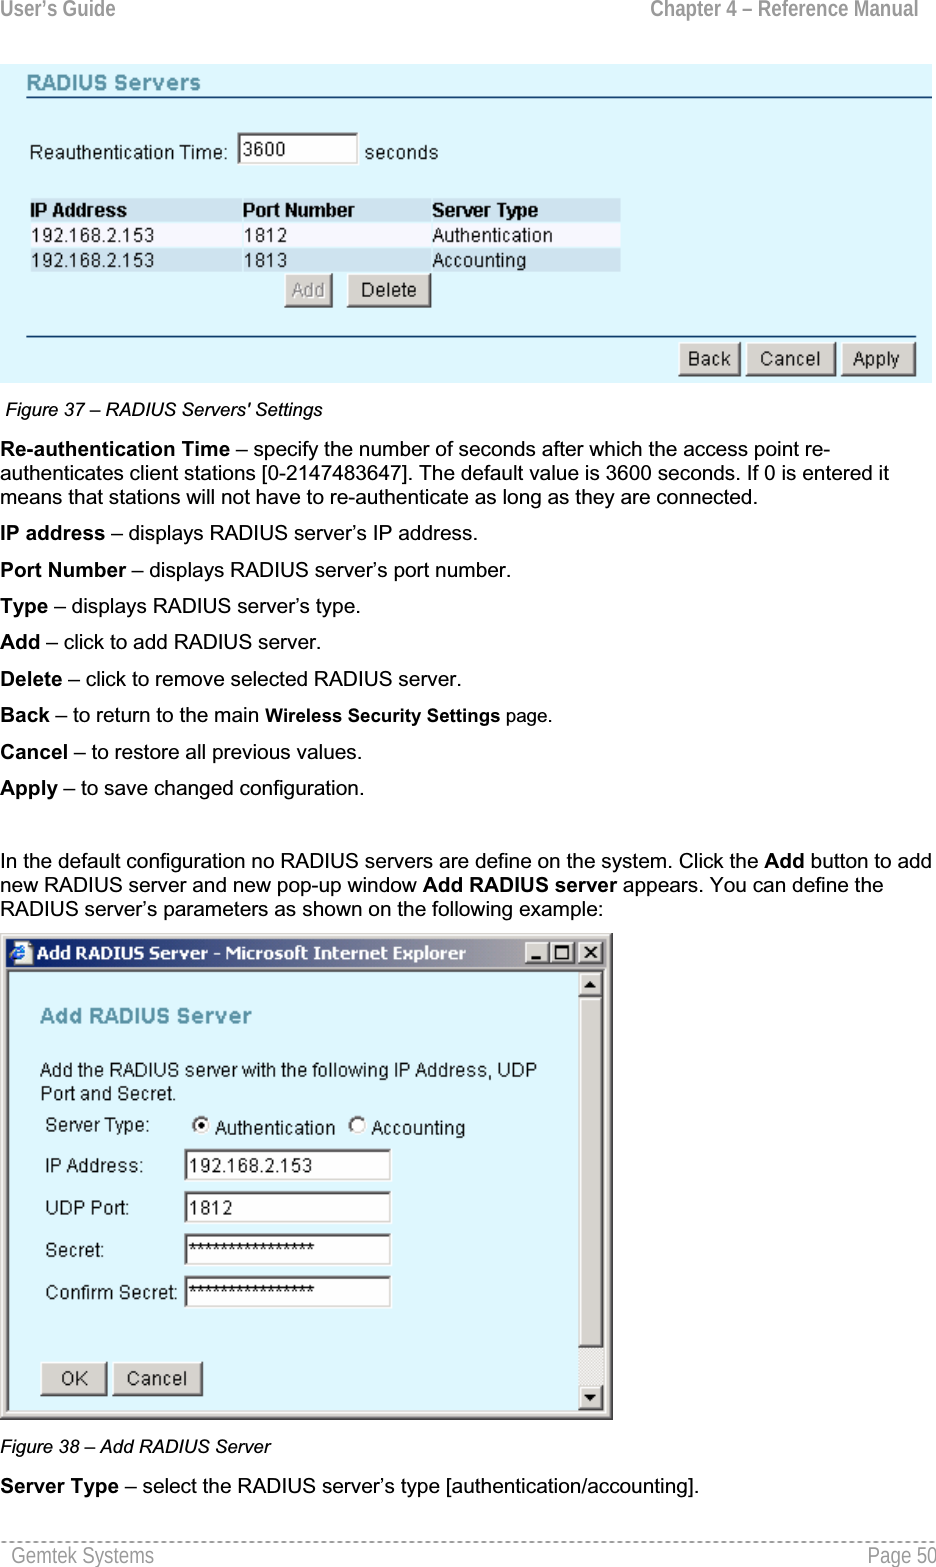 User’s Guide  Chapter 4 – Reference Manual Figure 37 – RADIUS Servers&apos; Settings Re-authentication Time – specify the number of seconds after which the access point re-authenticates client stations [0-2147483647]. The default value is 3600 seconds. If 0 is entered it means that stations will not have to re-authenticate as long as they are connected.IP address – displays RADIUS server’s IP address.Port Number – displays RADIUS server’s port number.Type – displays RADIUS server’s type. Add – click to add RADIUS server.Delete – click to remove selected RADIUS server.Back – to return to the main Wireless Security Settings page.Cancel – to restore all previous values.Apply – to save changed configuration.In the default configuration no RADIUS servers are define on the system. Click the Add button to addnew RADIUS server and new pop-up window Add RADIUS server appears. You can define the RADIUS server’s parameters as shown on the following example: Figure 38 – Add RADIUS ServerServer Type – select the RADIUS server’s type [authentication/accounting].Gemtek Systems  Page 50